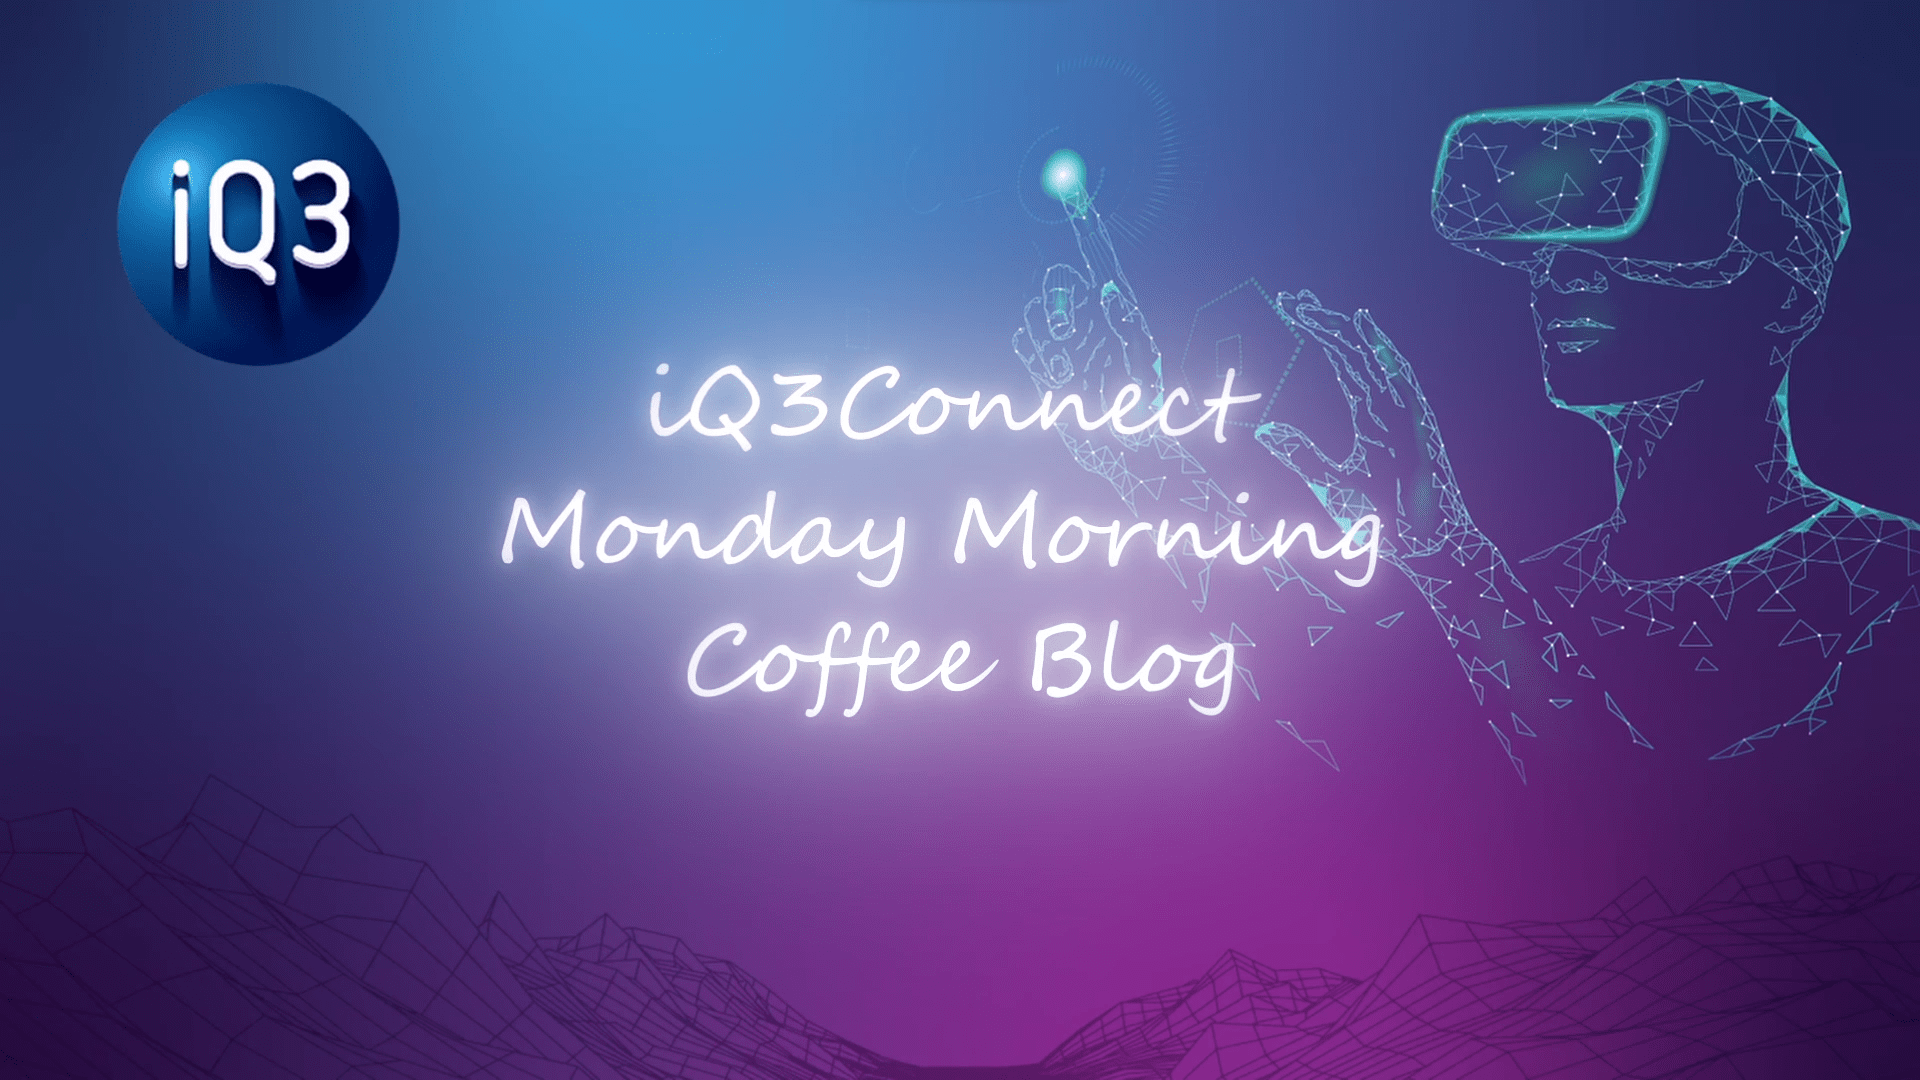 Monday Morning Coffee Blog - Introduction to iQ3Connect